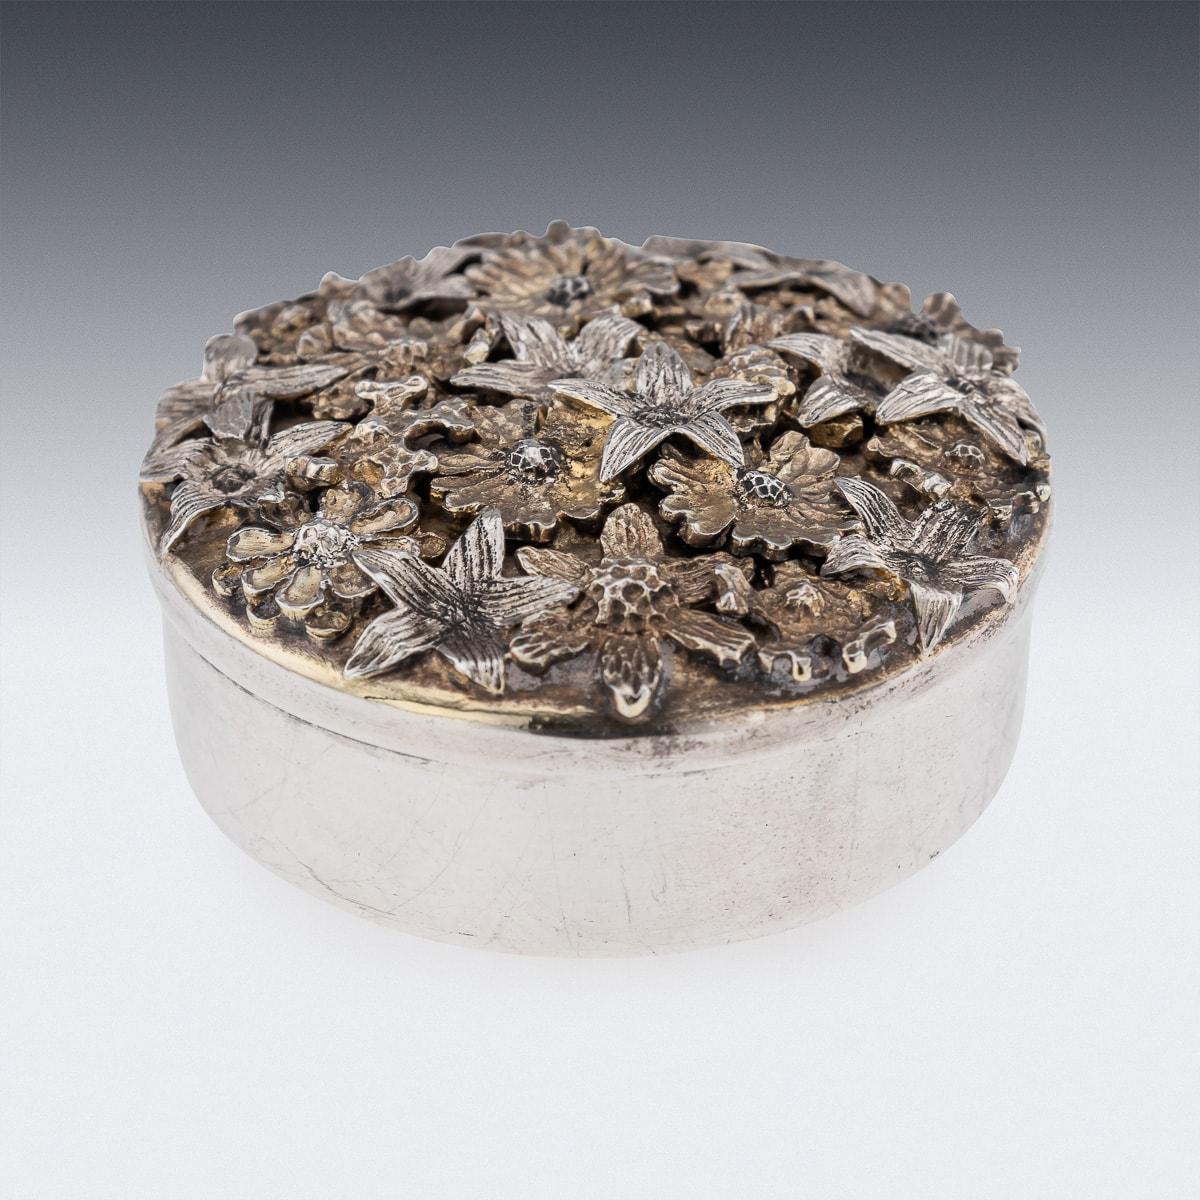 Modern 20th Century Stuart Devlin solid silver gilt trinket box, the lid applied with flowers. Hallmarked English Silver (925 Standard), London, year 1978 (D), Maker's mark S.D (Stuart Devlin).

CONDITION
In Great Condition - Wear expected with age.